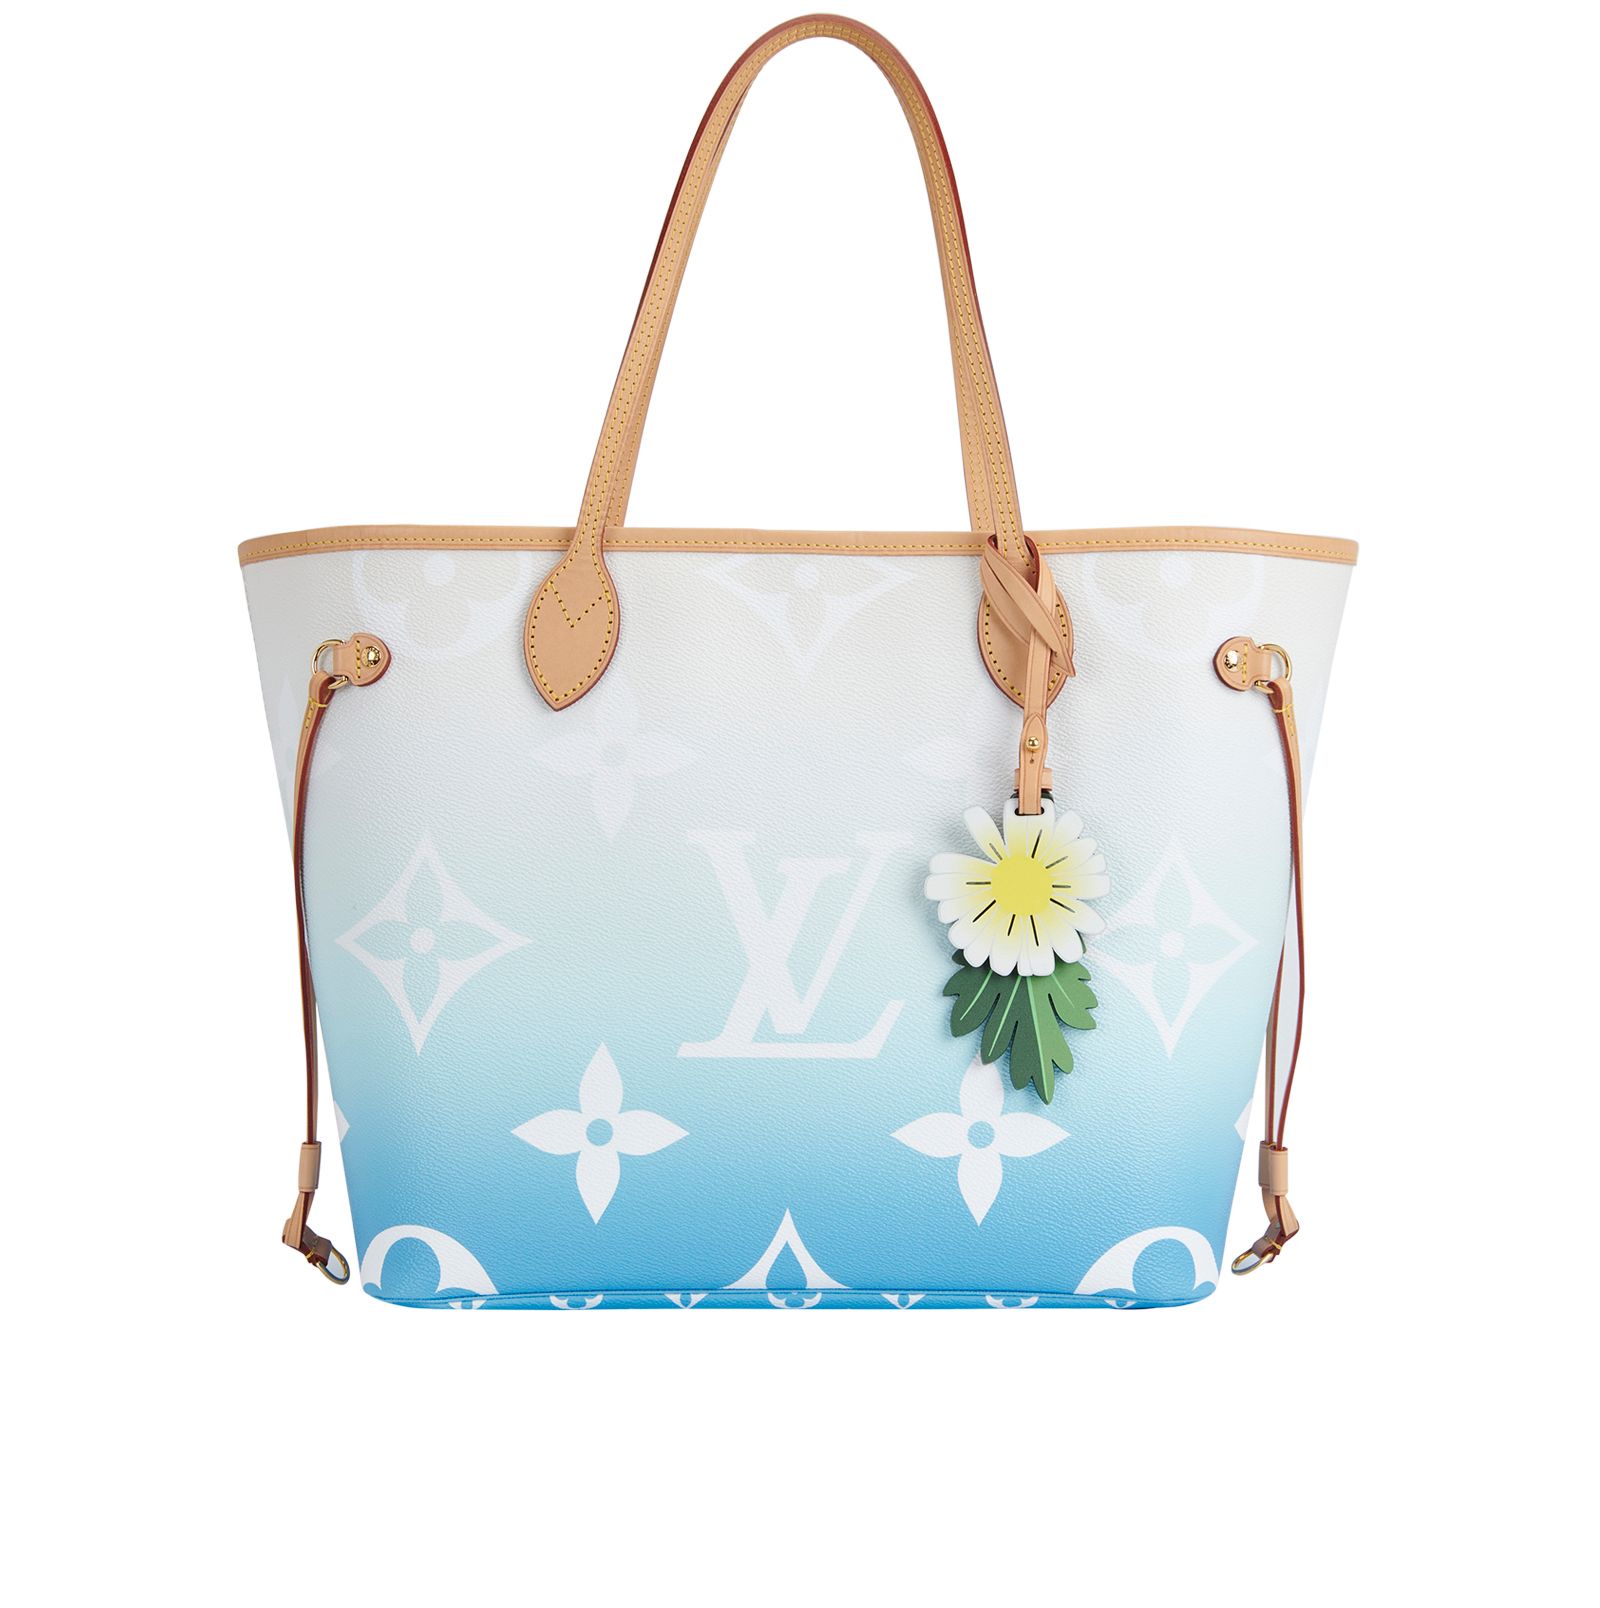 By The Pool 2021 Neverfull MM, Louis Vuitton - Designer Exchange